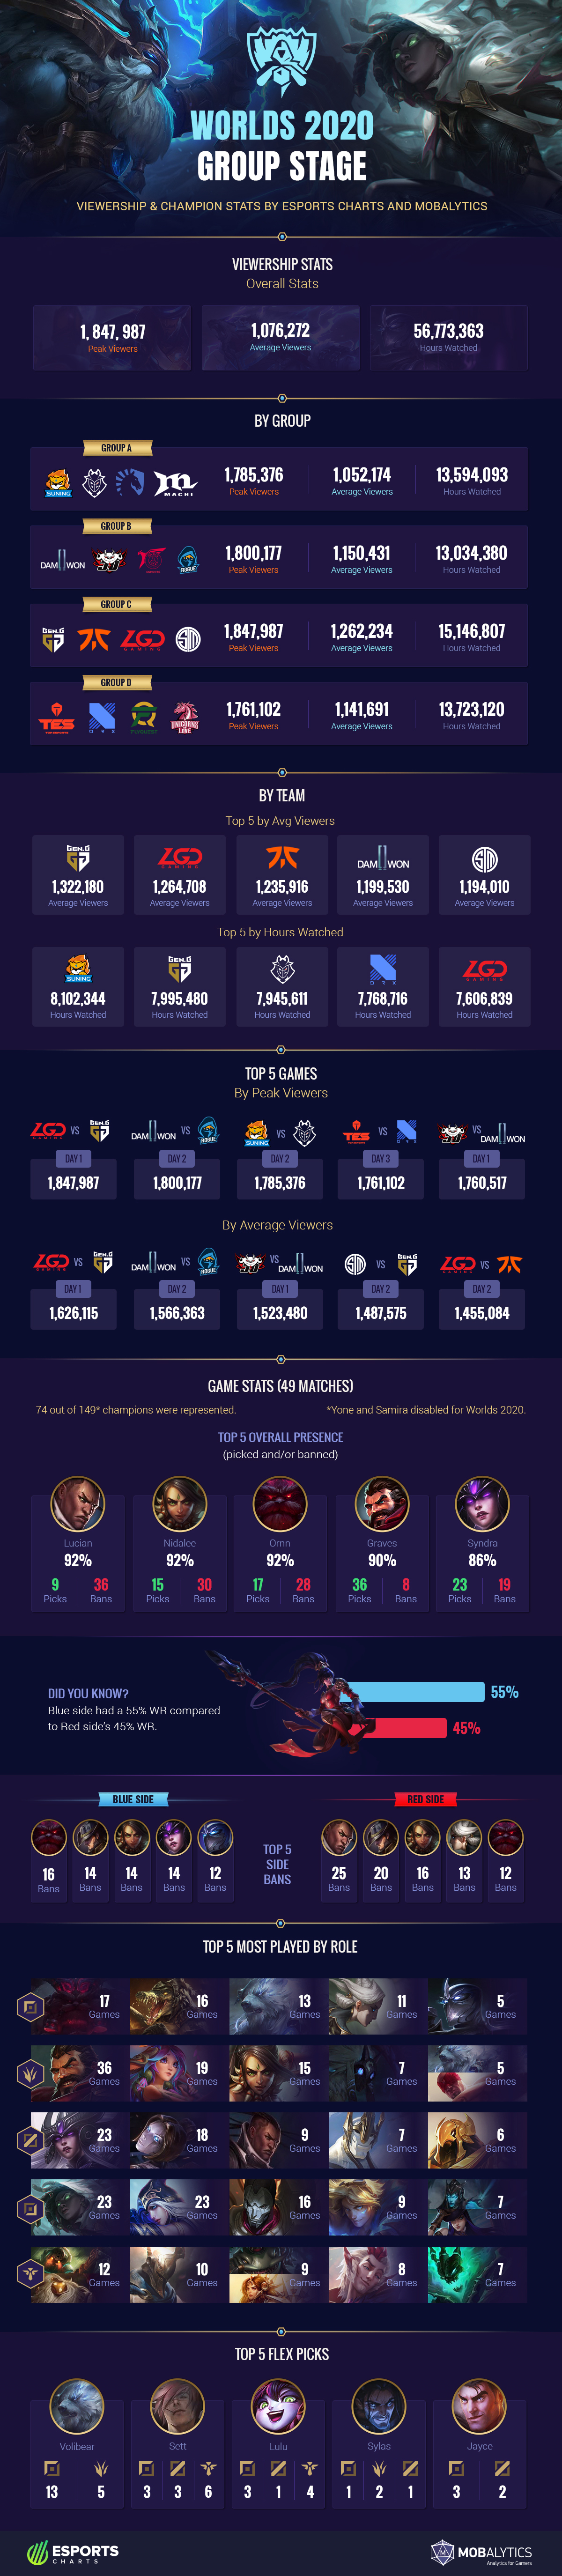 Worlds 2020 Group Stage Viewership and Champion Stats